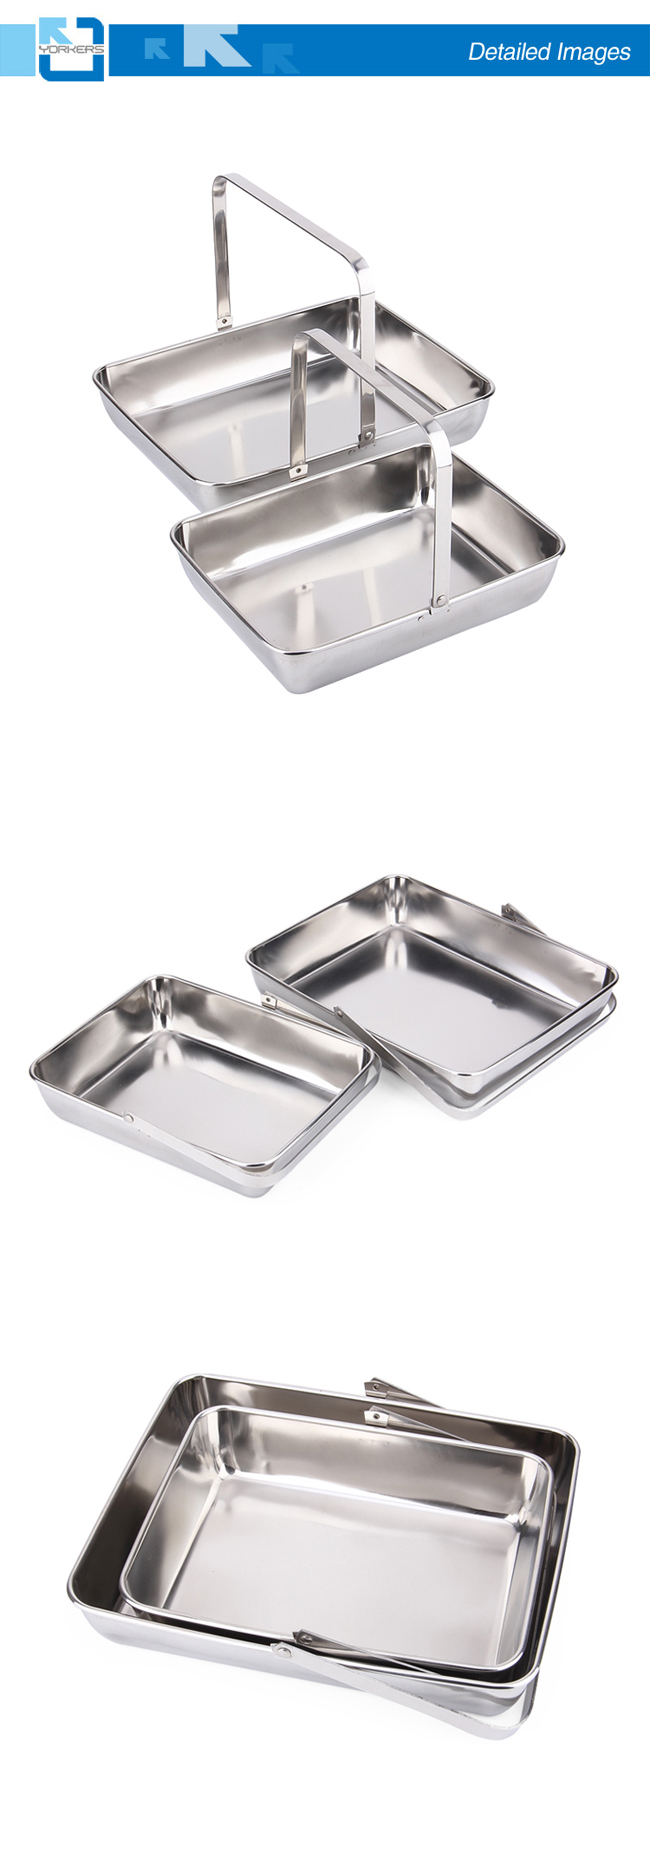 Wholesale Hotel Supplies Stainless Steel Portable Dish Towel & Serving Tray